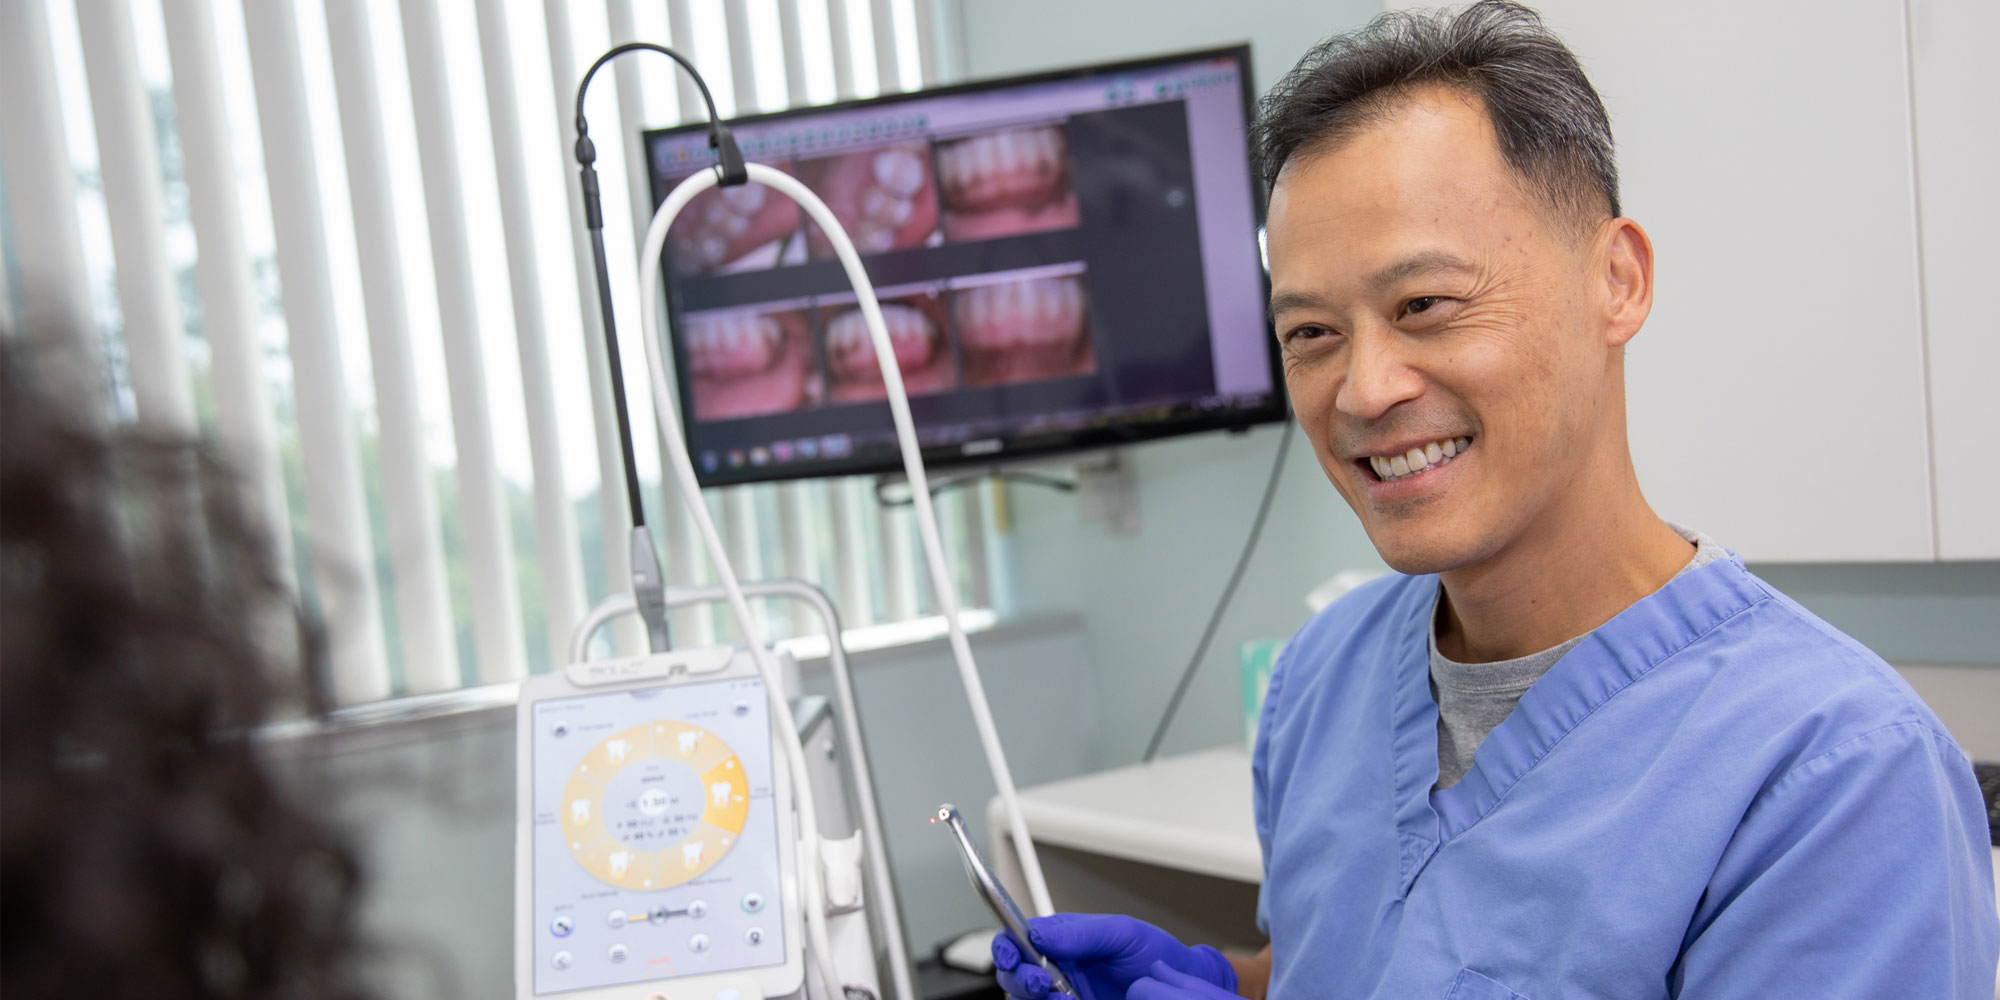 dr wang discussing soft tissue recontouring procedure Annandale, VA